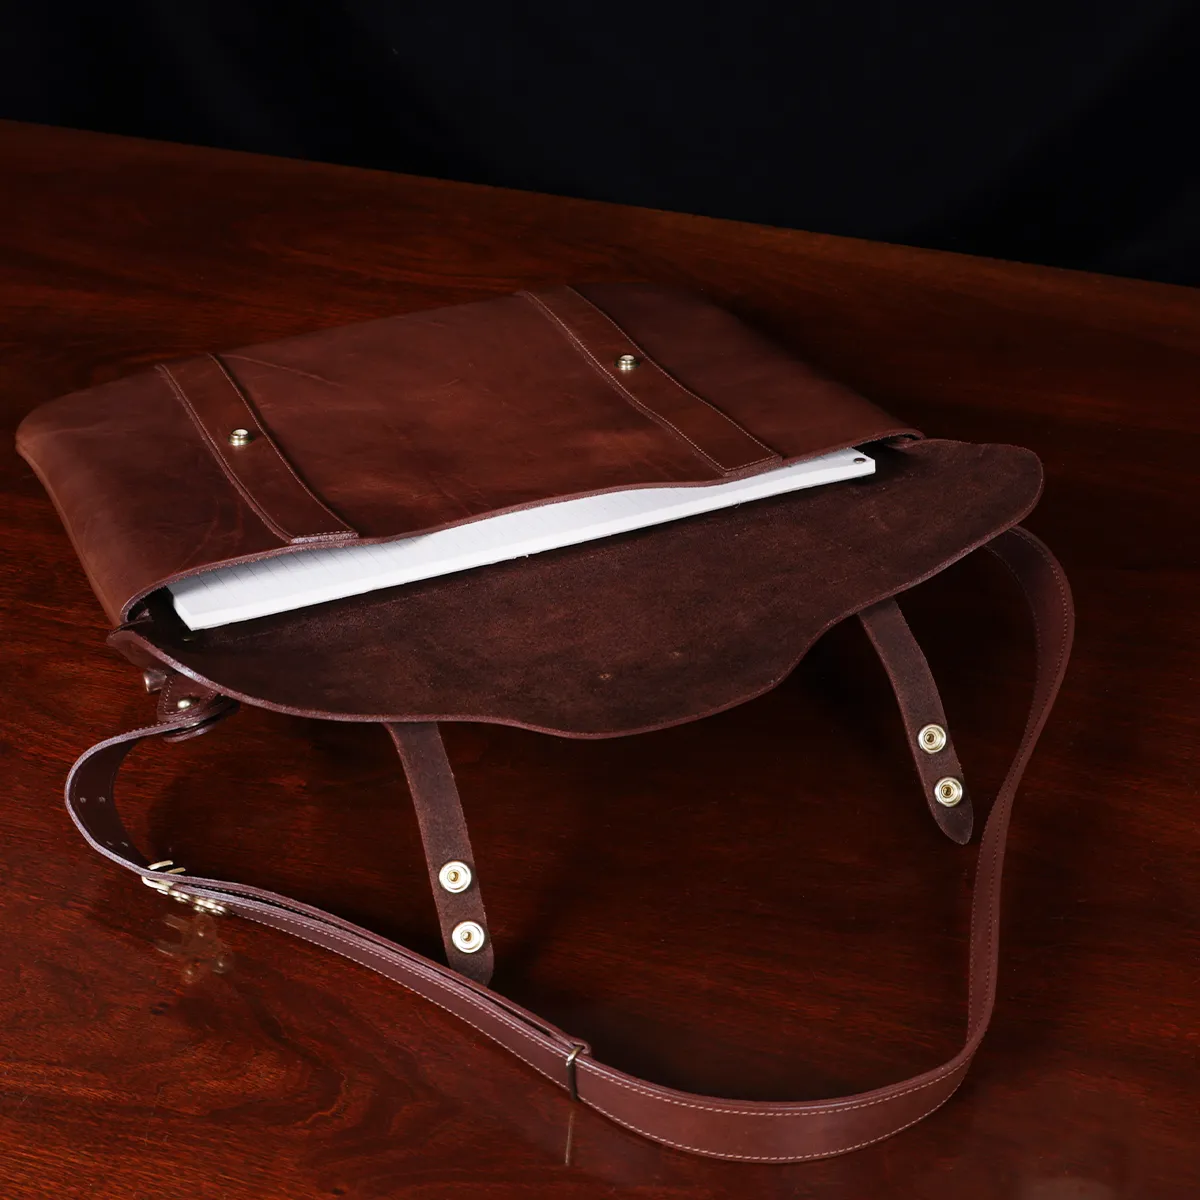 no 16 brown vintage leather document bag with strap on a wooden table with a dark background - open view